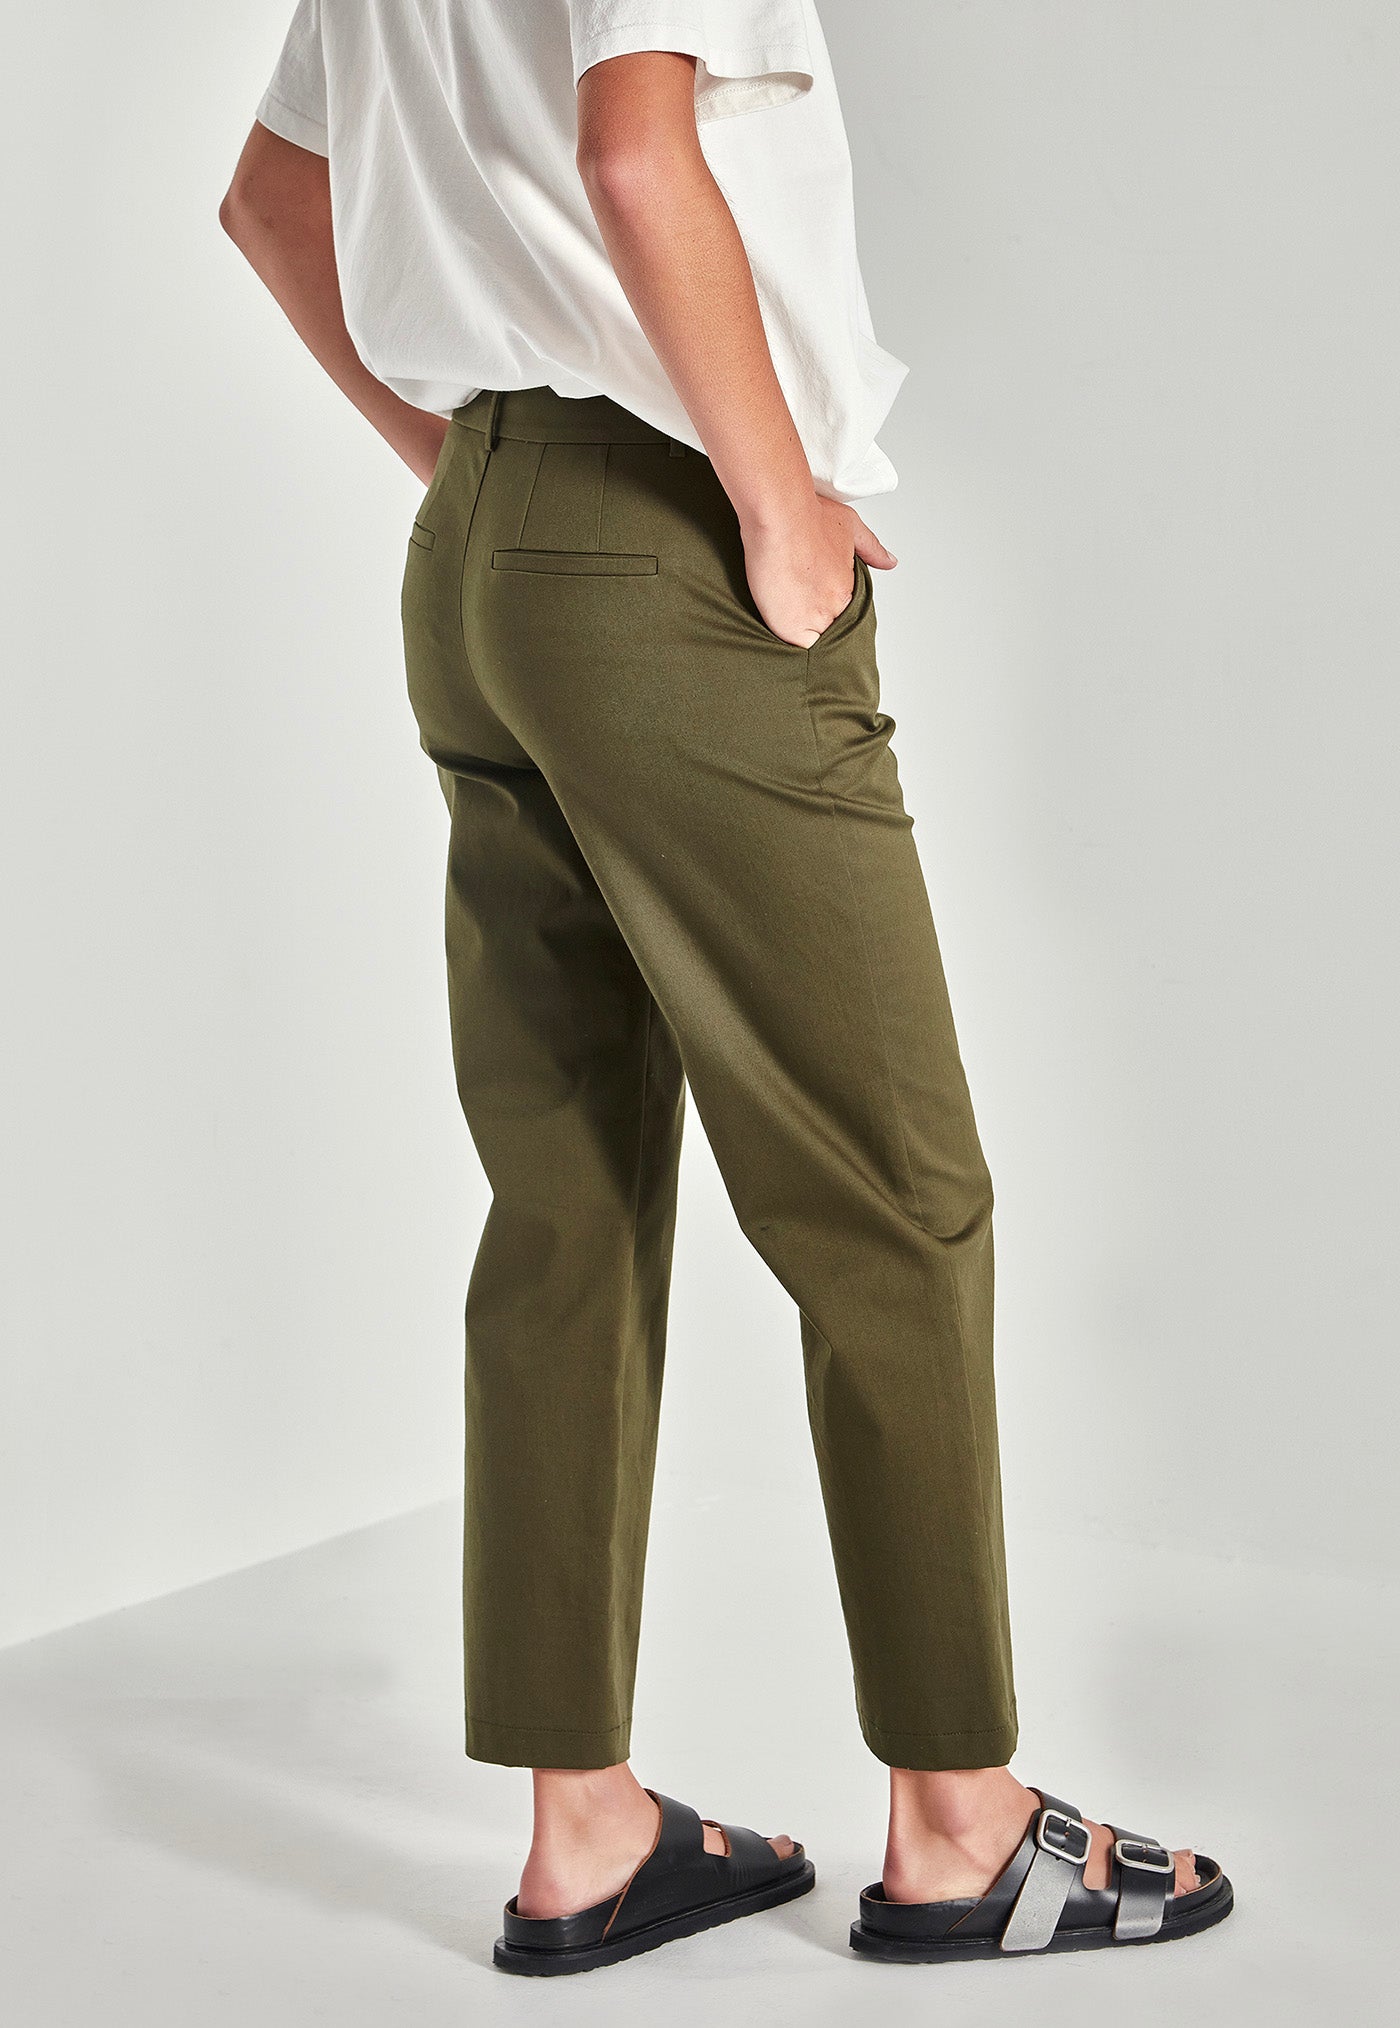 Chino Pant - Olive sold by Angel Divine